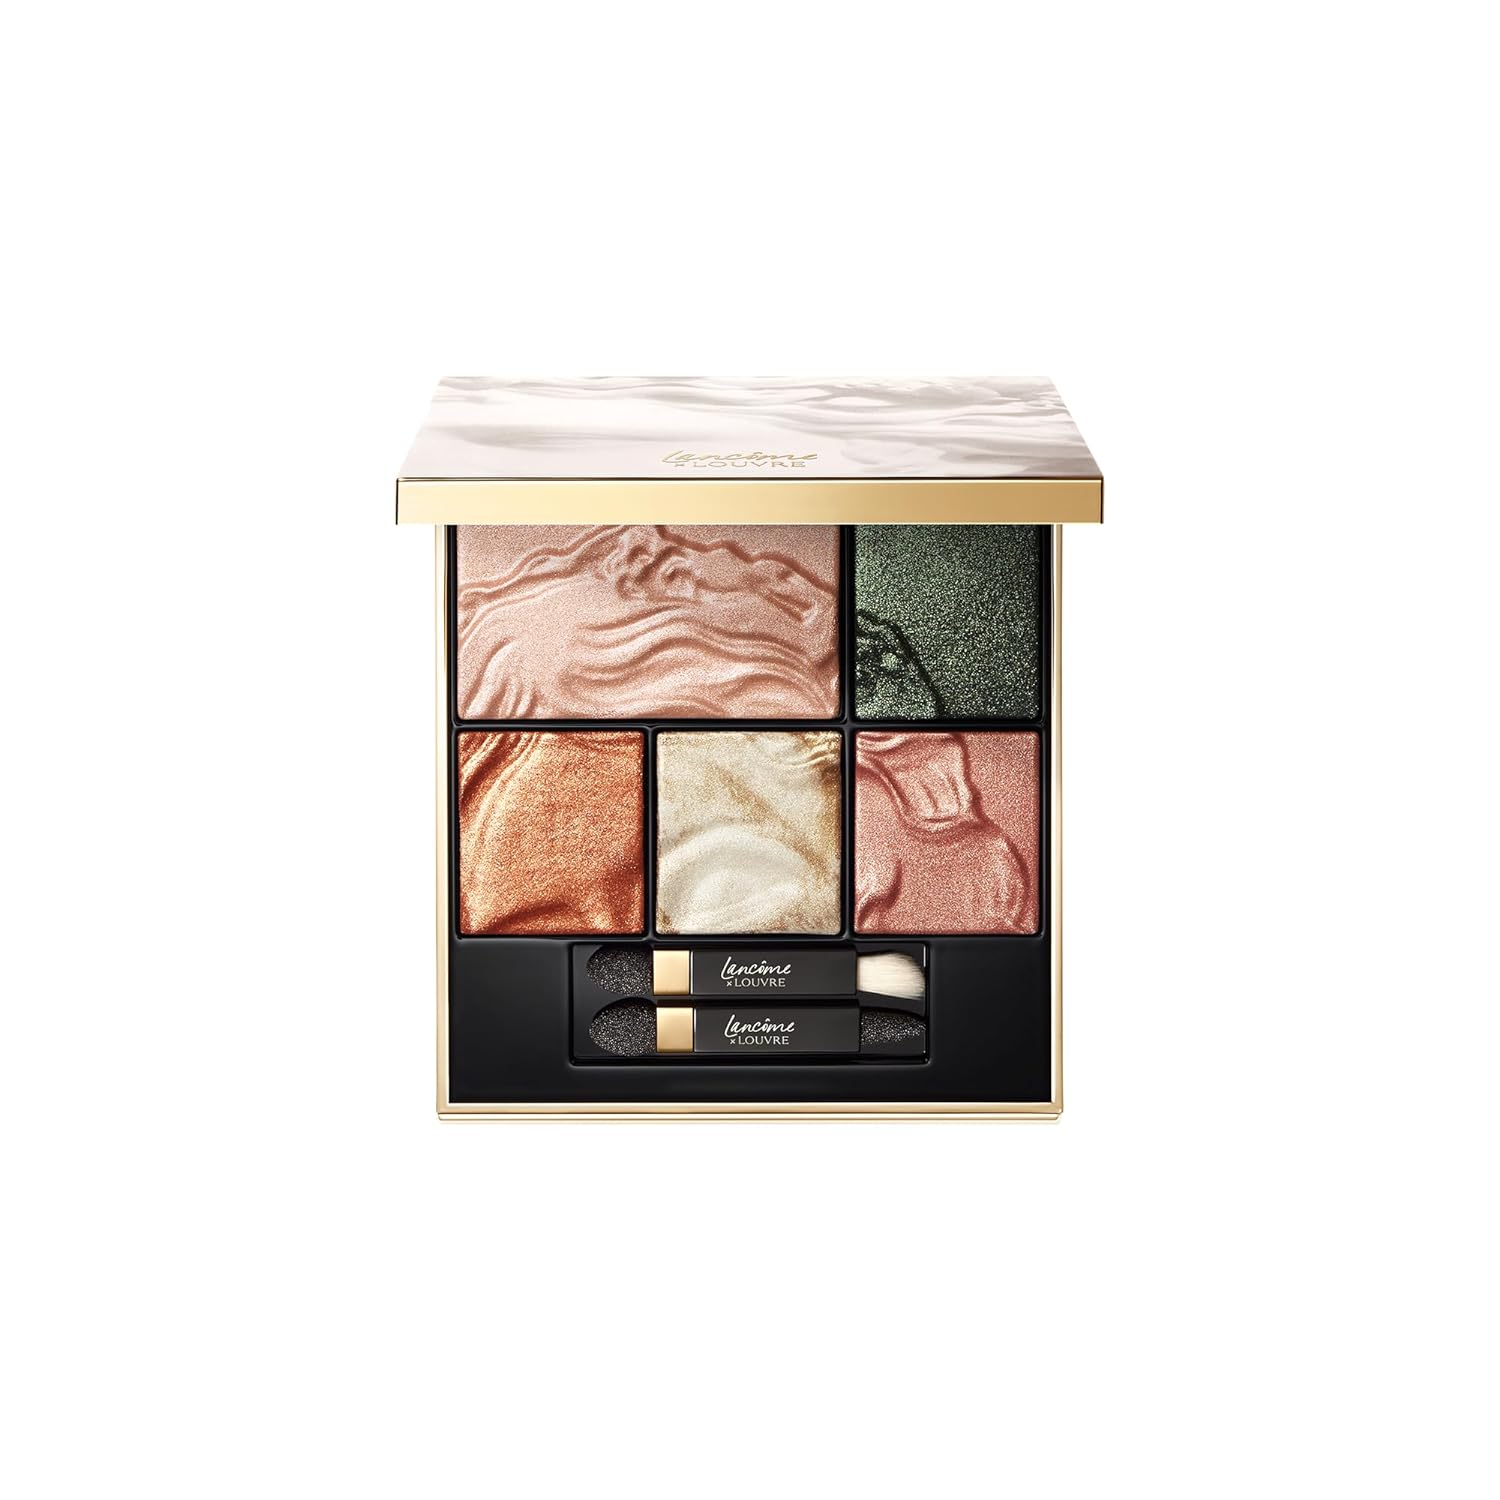 Lancôme x The Louvre Collection Richelieu Wing Face & Eyeshadow Palette - Makeup Palette Includes Face Highlighter & 4 High-Pigmented, Shimmery Eyeshadow Shades